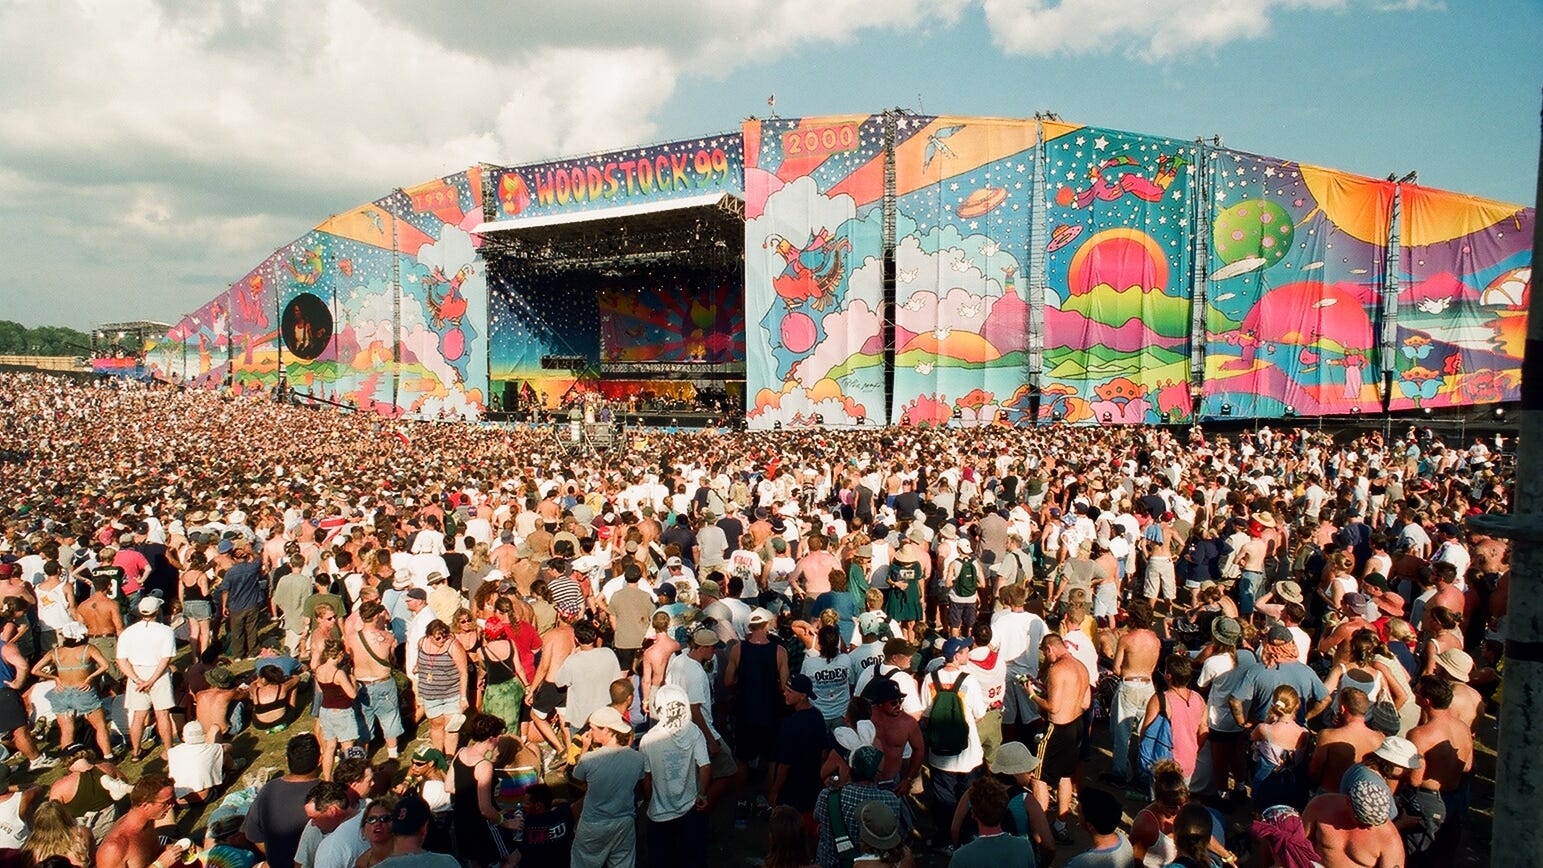 A throng of people gather at one of the festival's stages. Estimates of attendees range from 225,000-400,000.